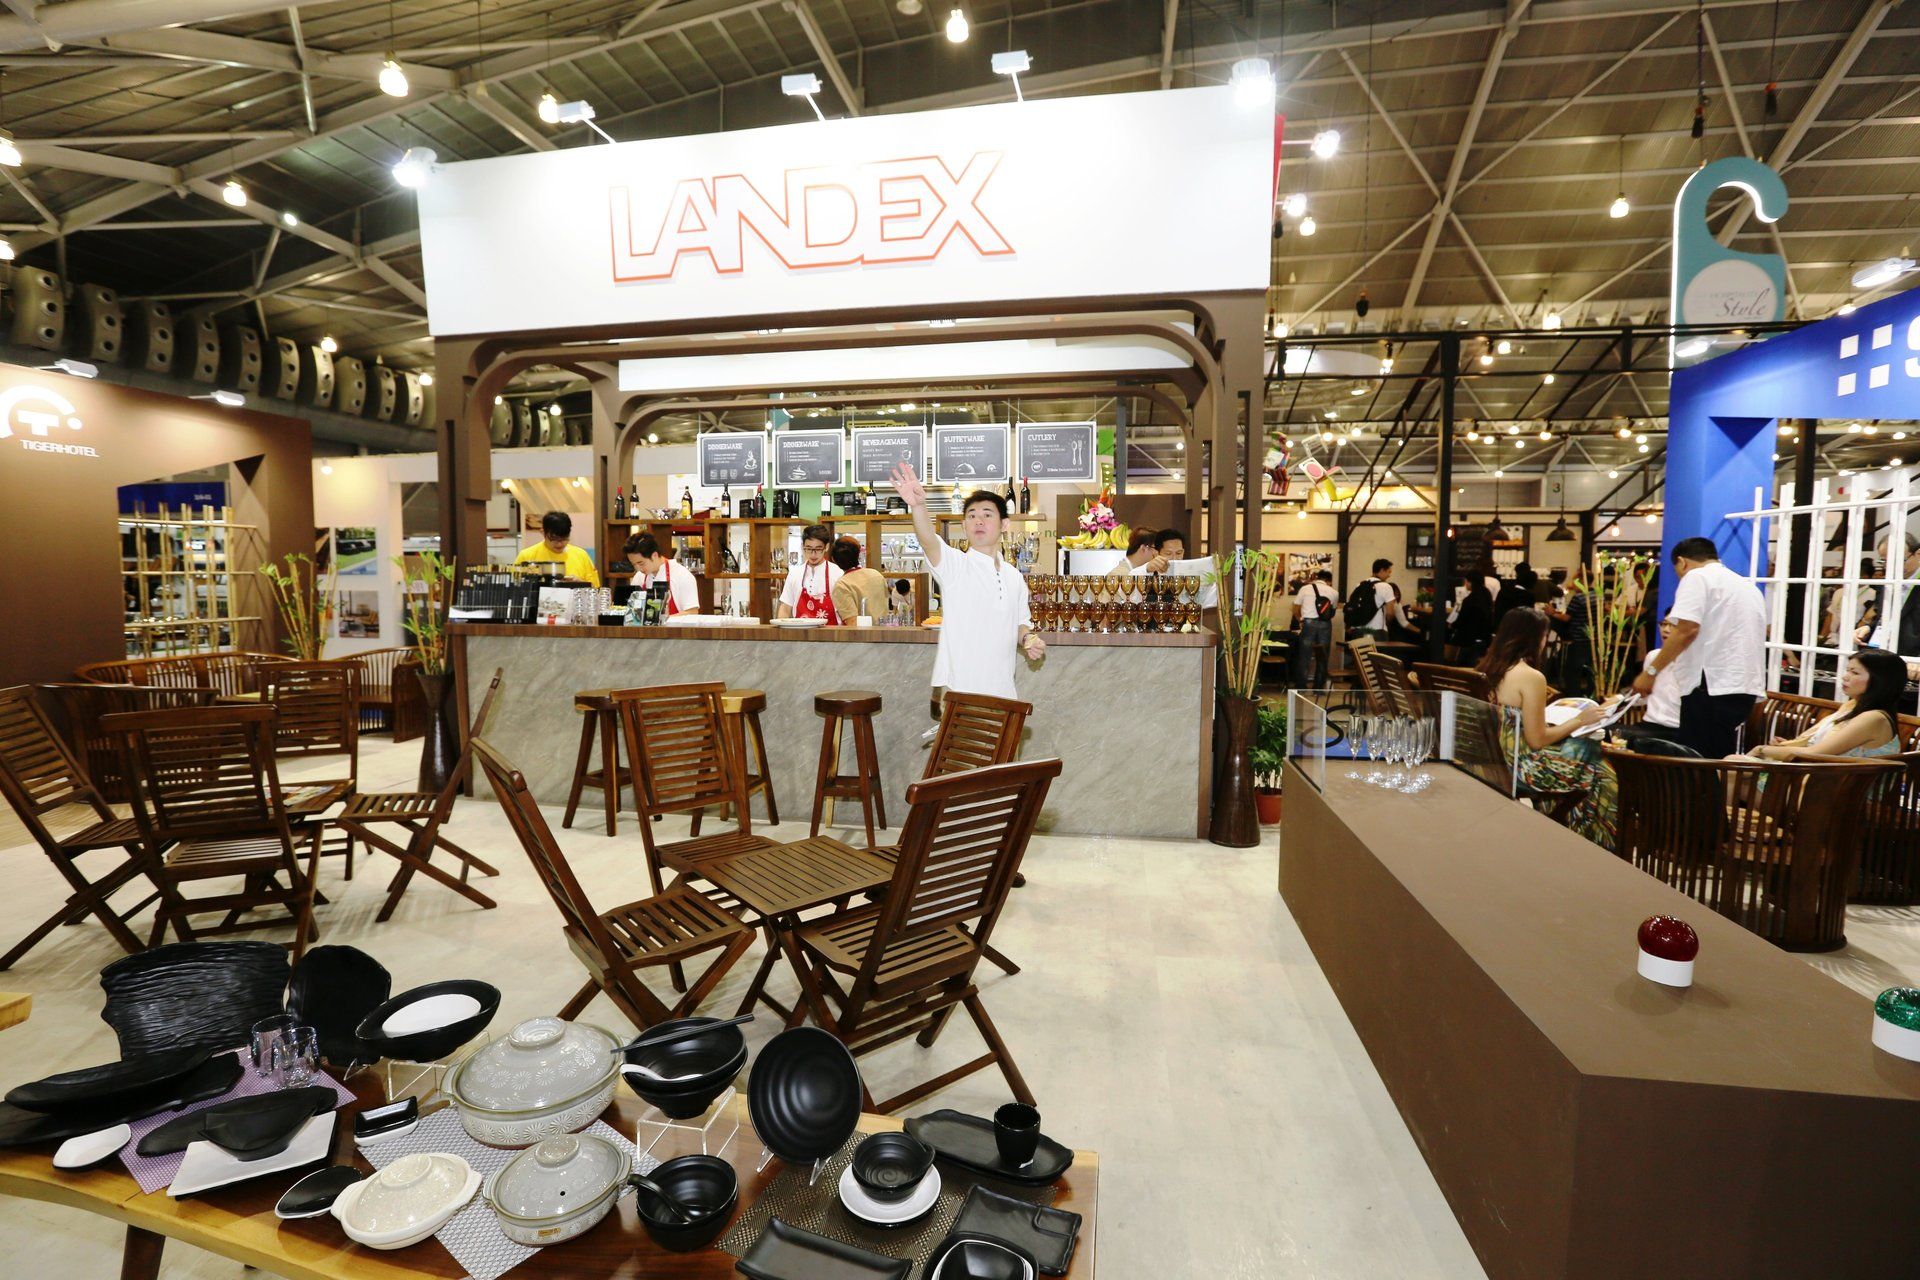 Landex @ Food & Hotel Asia 2016. Booth designed and built by Essential Global Fairs.